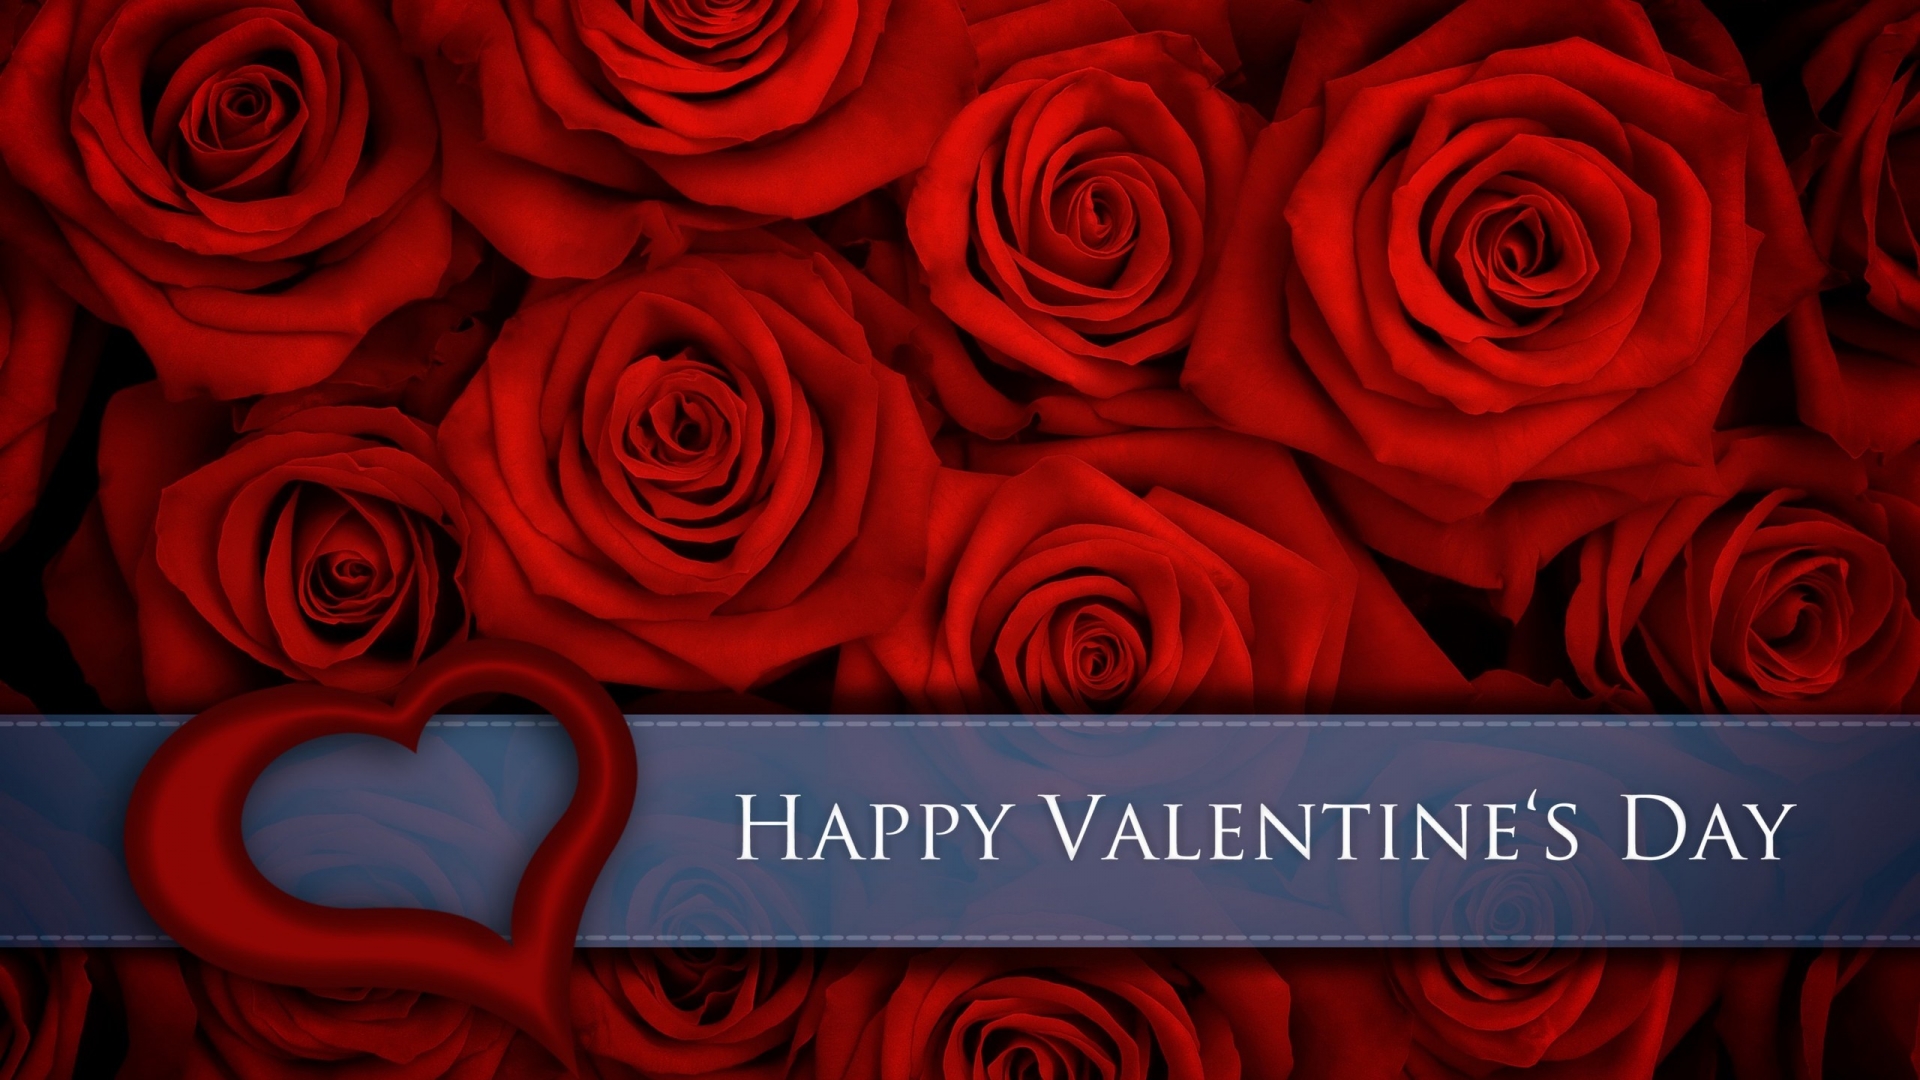 Red Roses for Valentines Day for 1920 x 1080 HDTV 1080p resolution